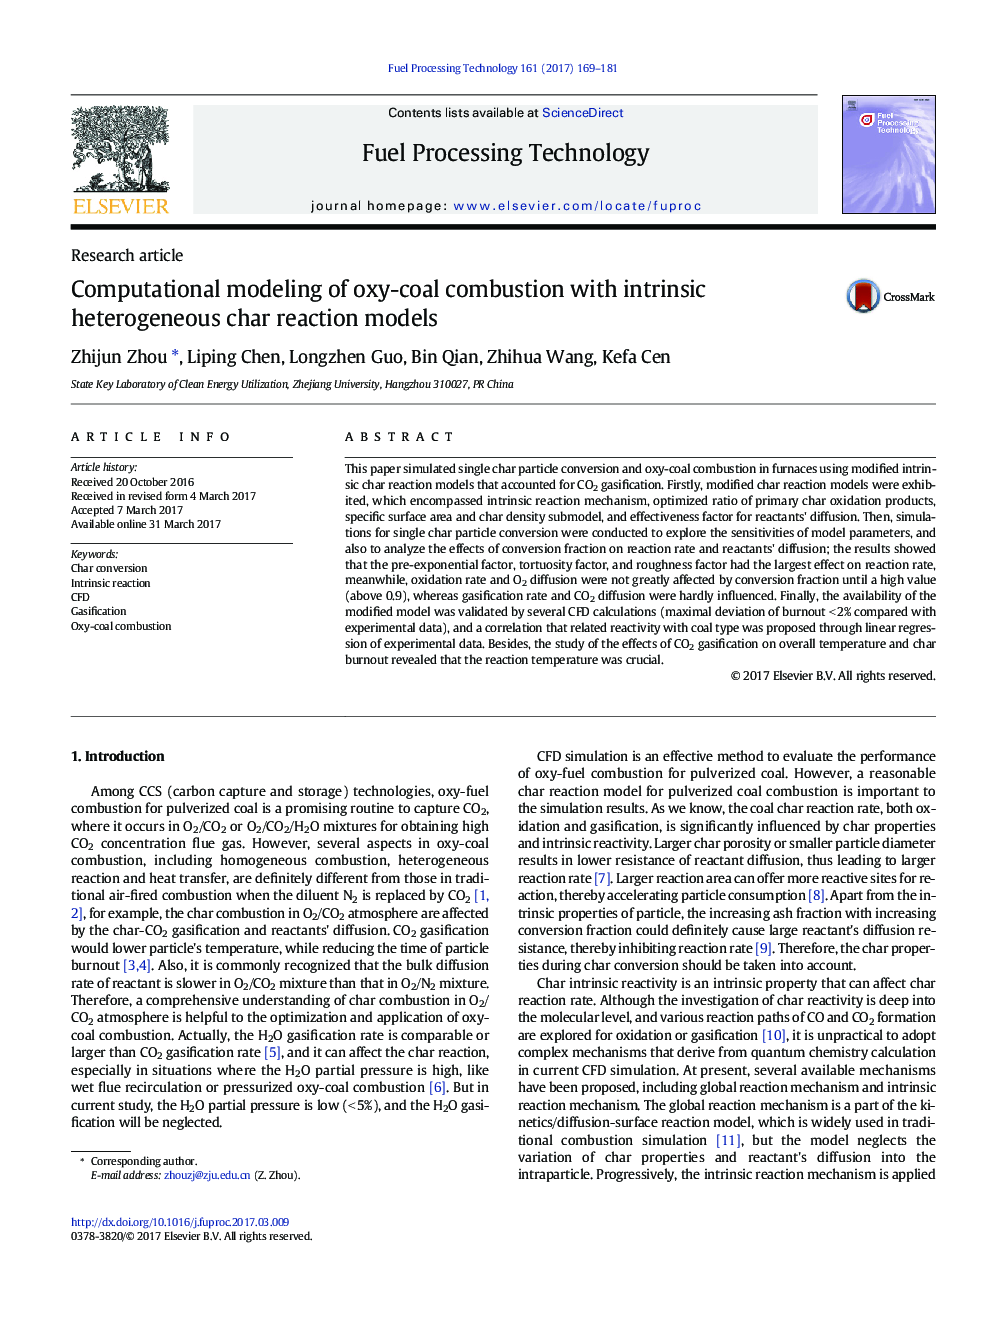 Computational modeling of oxy-coal combustion with intrinsic heterogeneous char reaction models